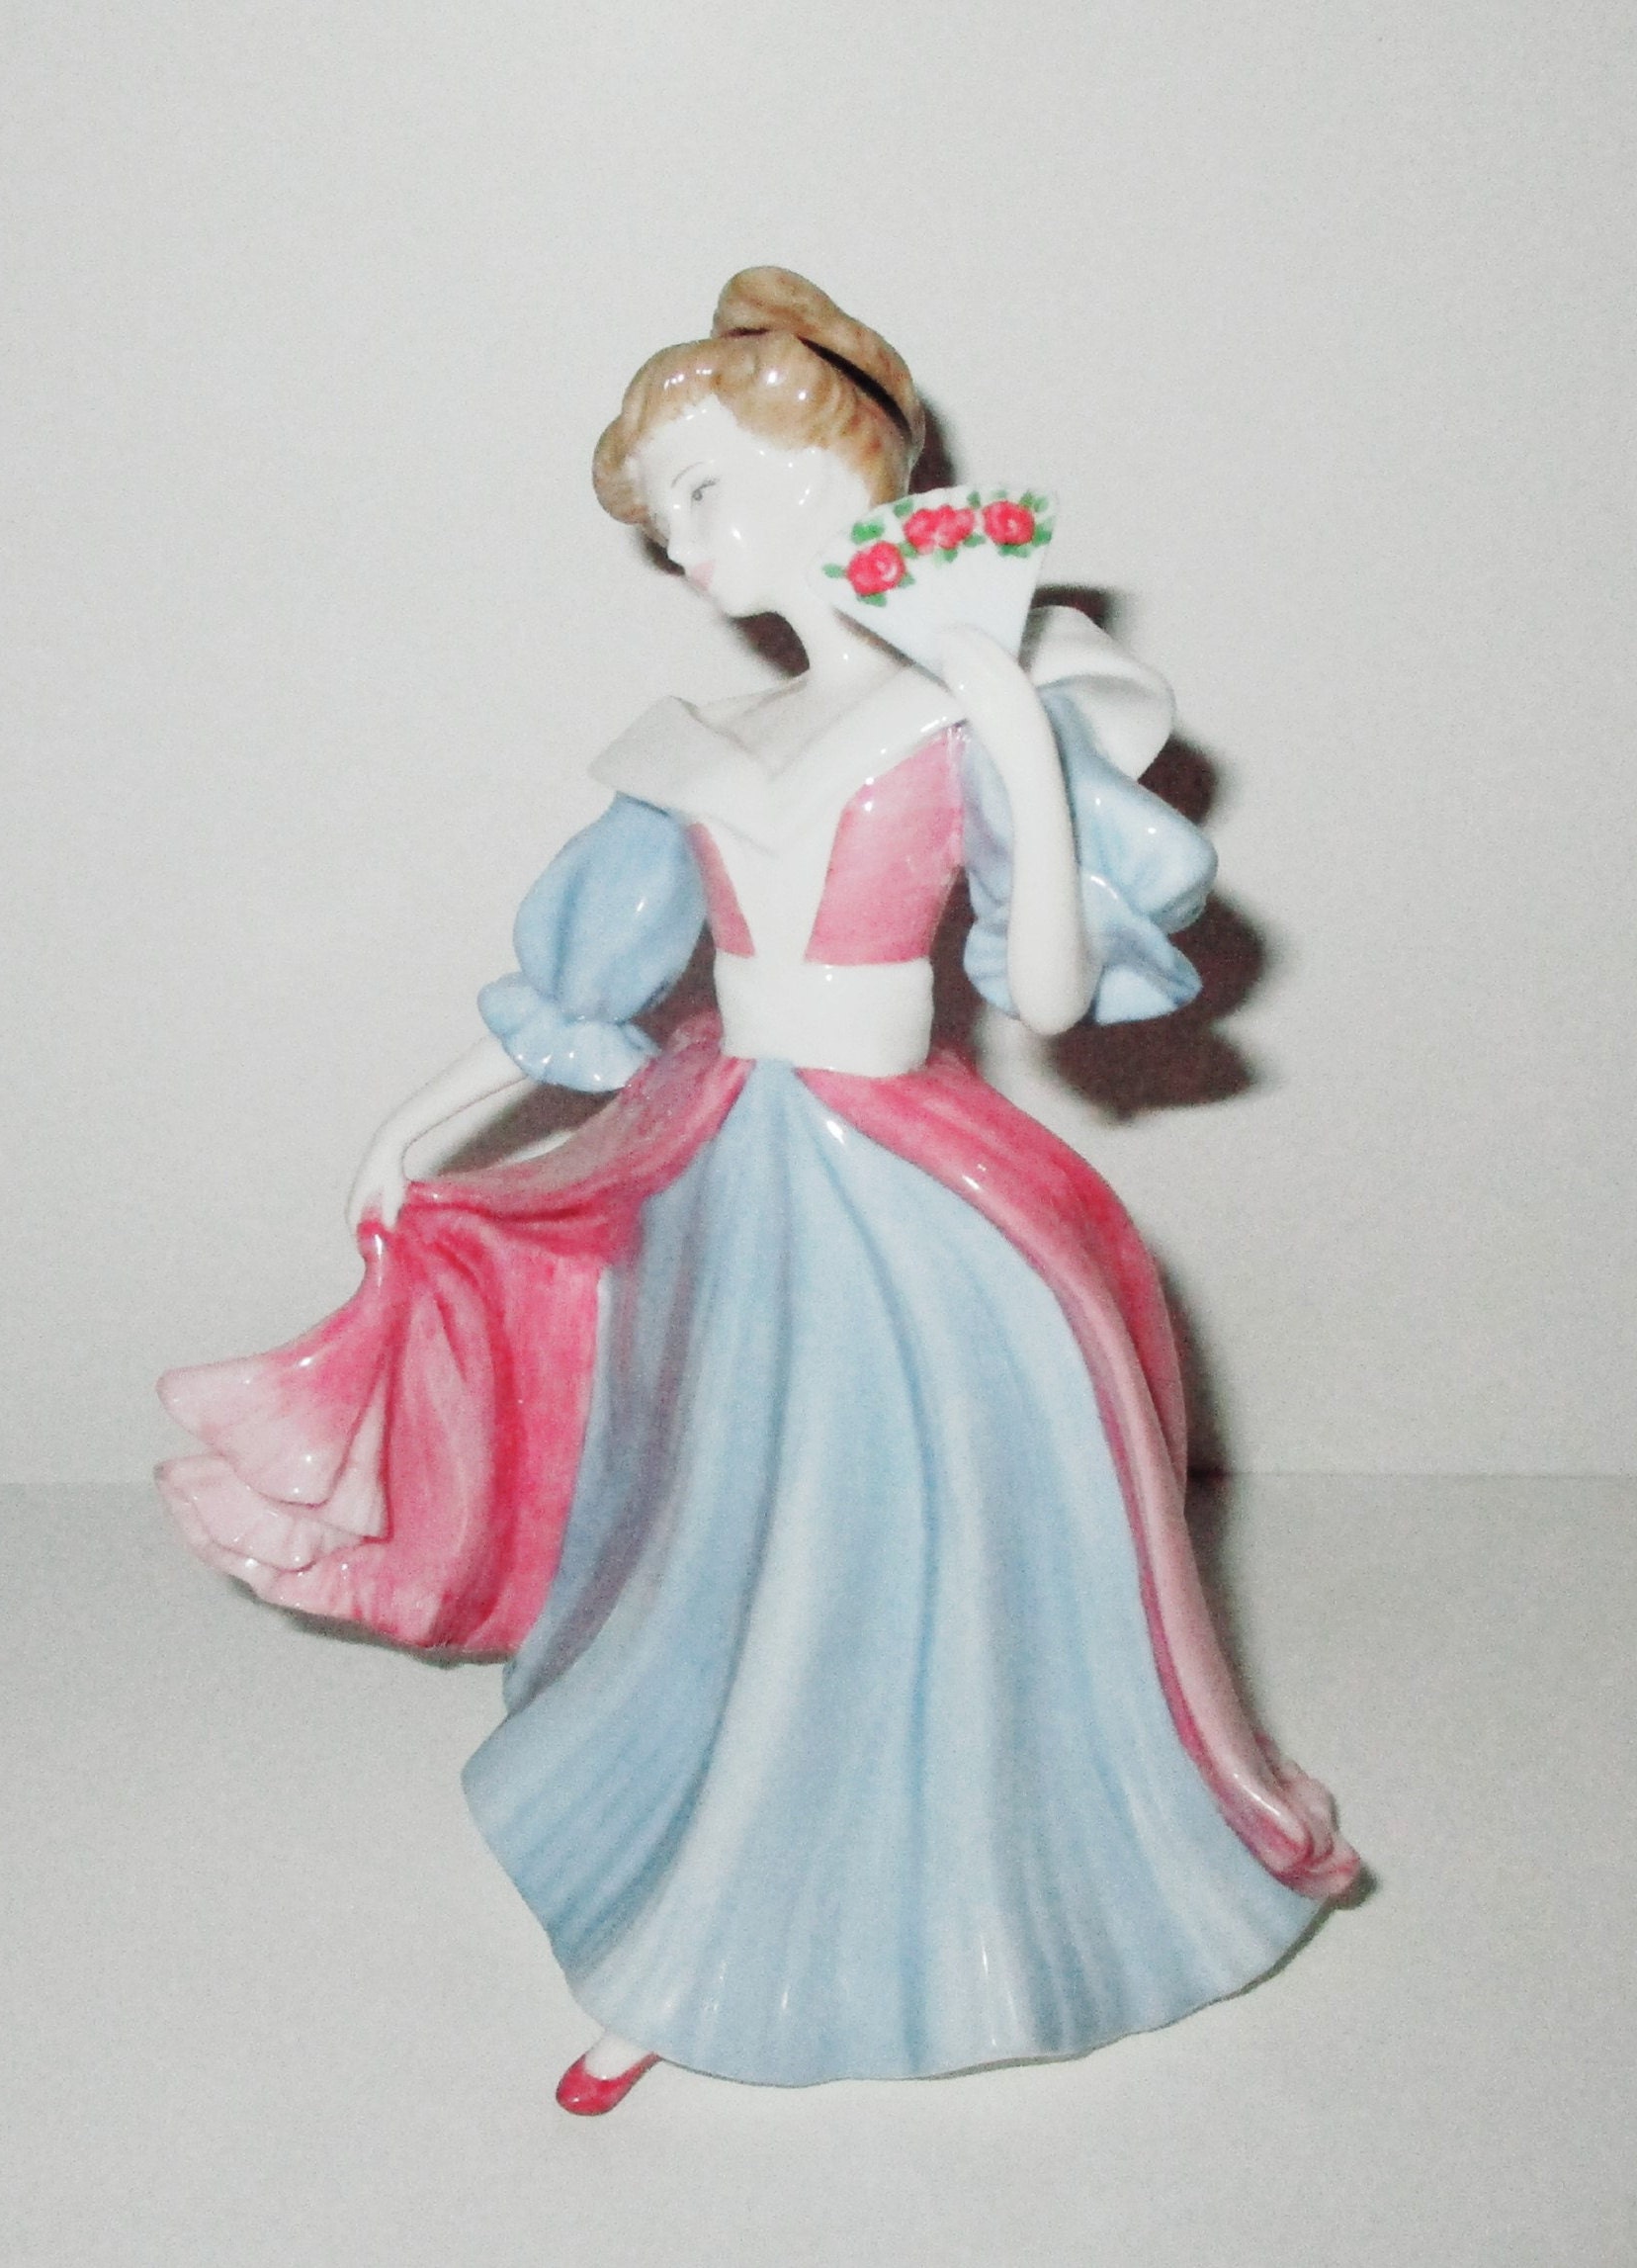 Lot of 12 Royal Doulton Figurines - Two Streets Estates